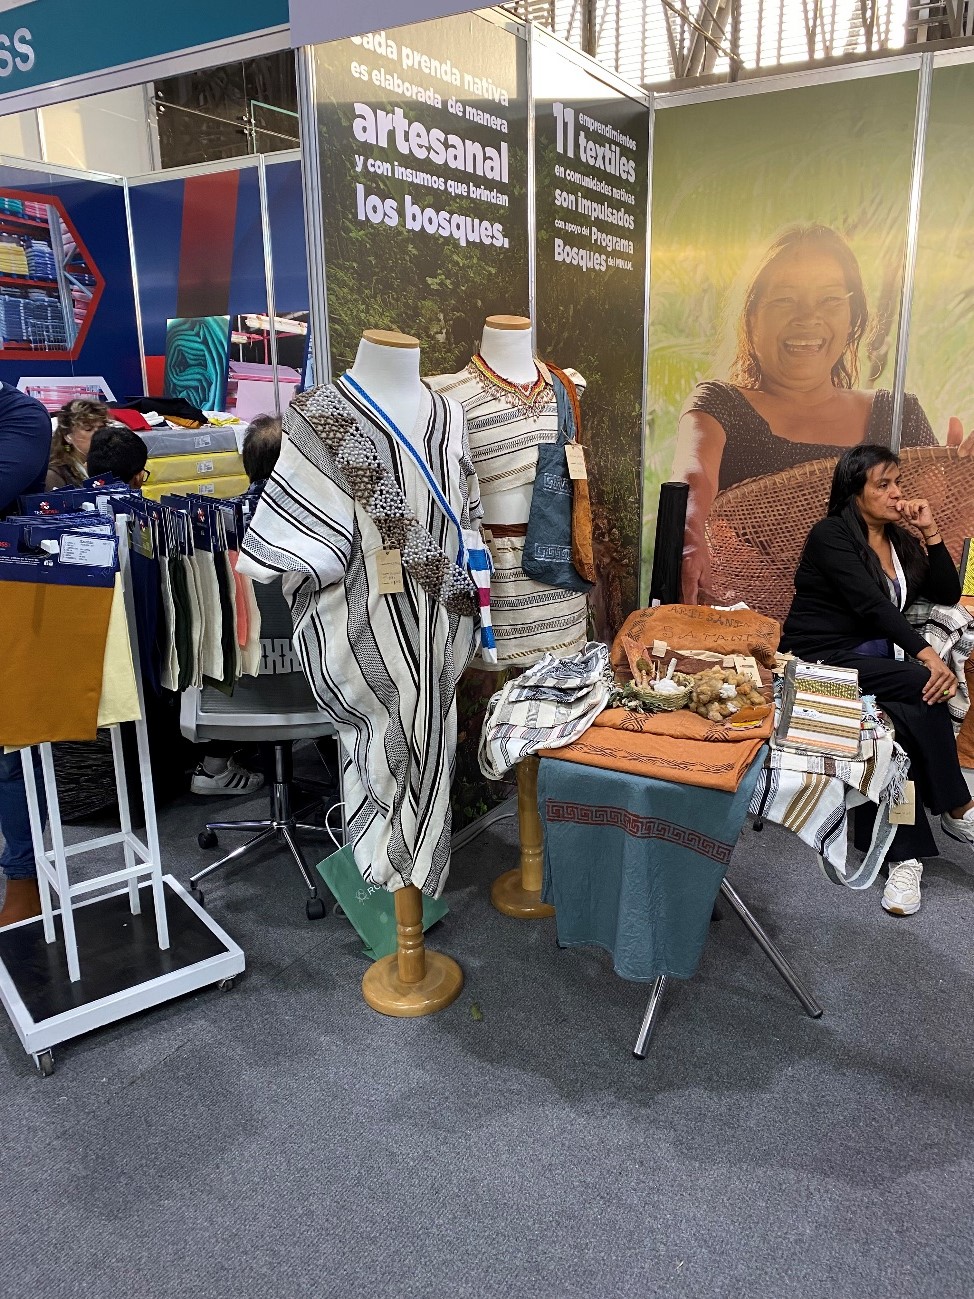 An analysis of the Peruvian market for Spanish Textile Companies